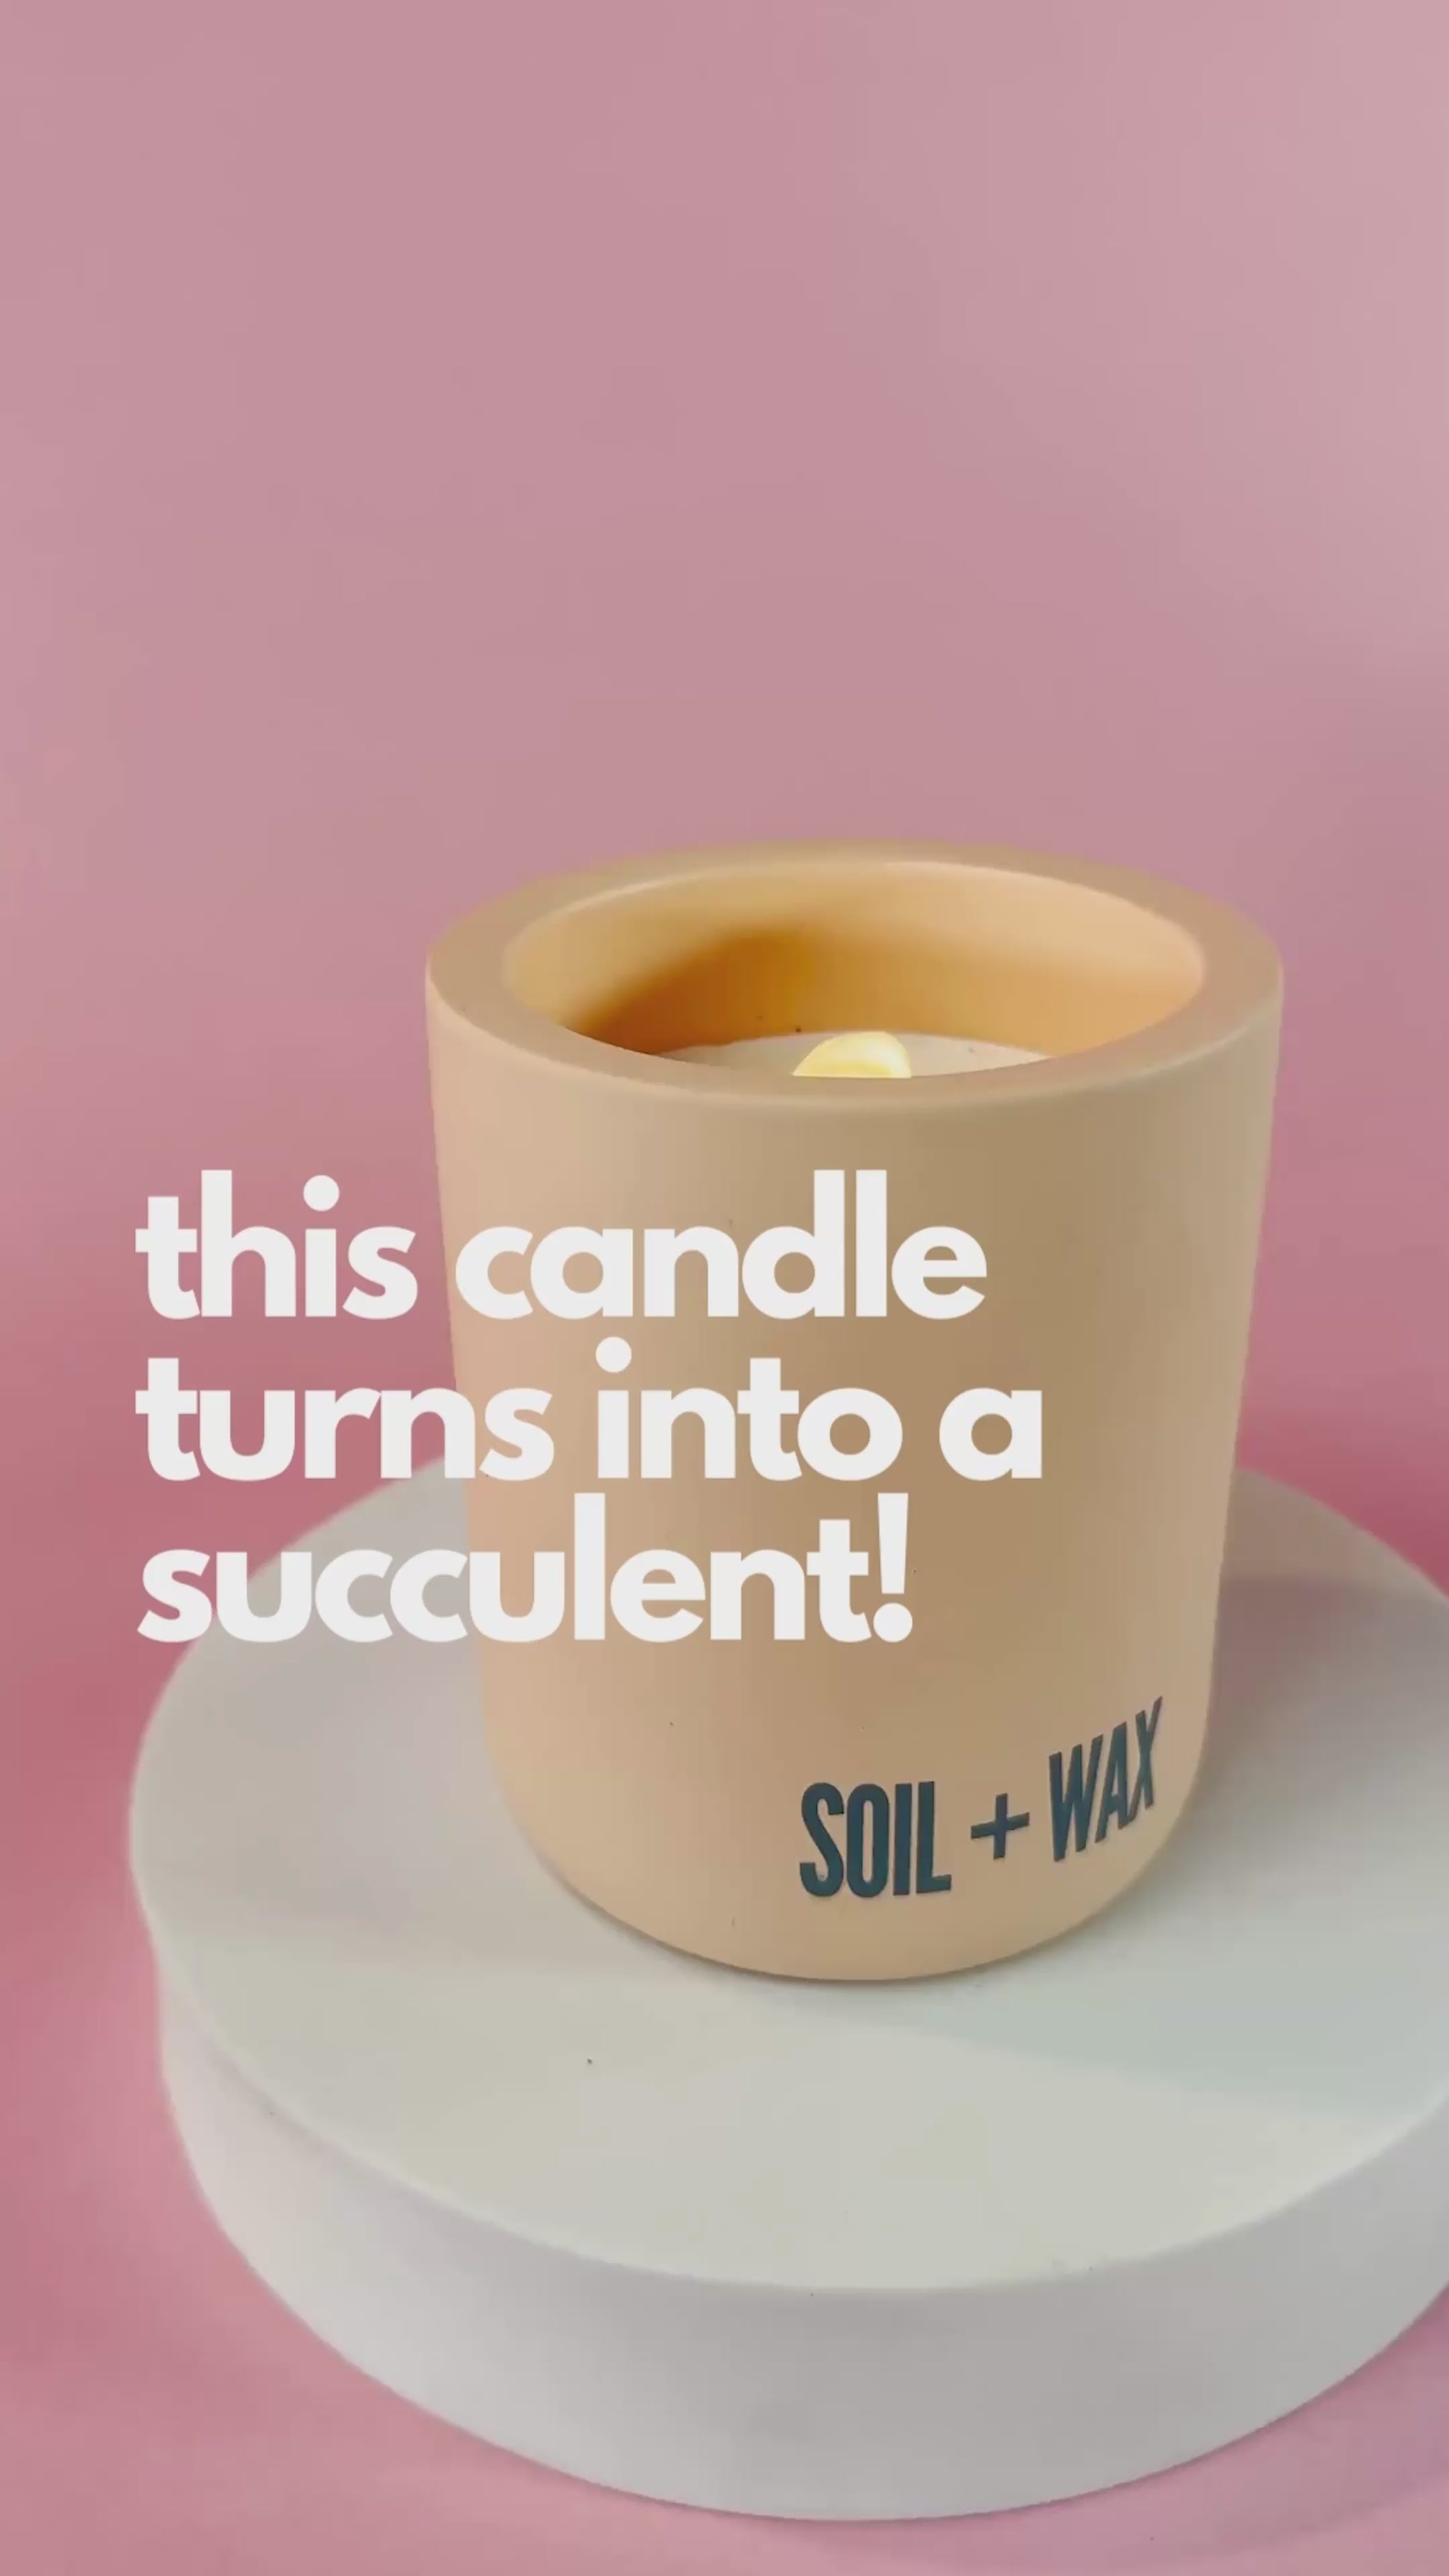 Coconut wax candle and succulent growing kit video